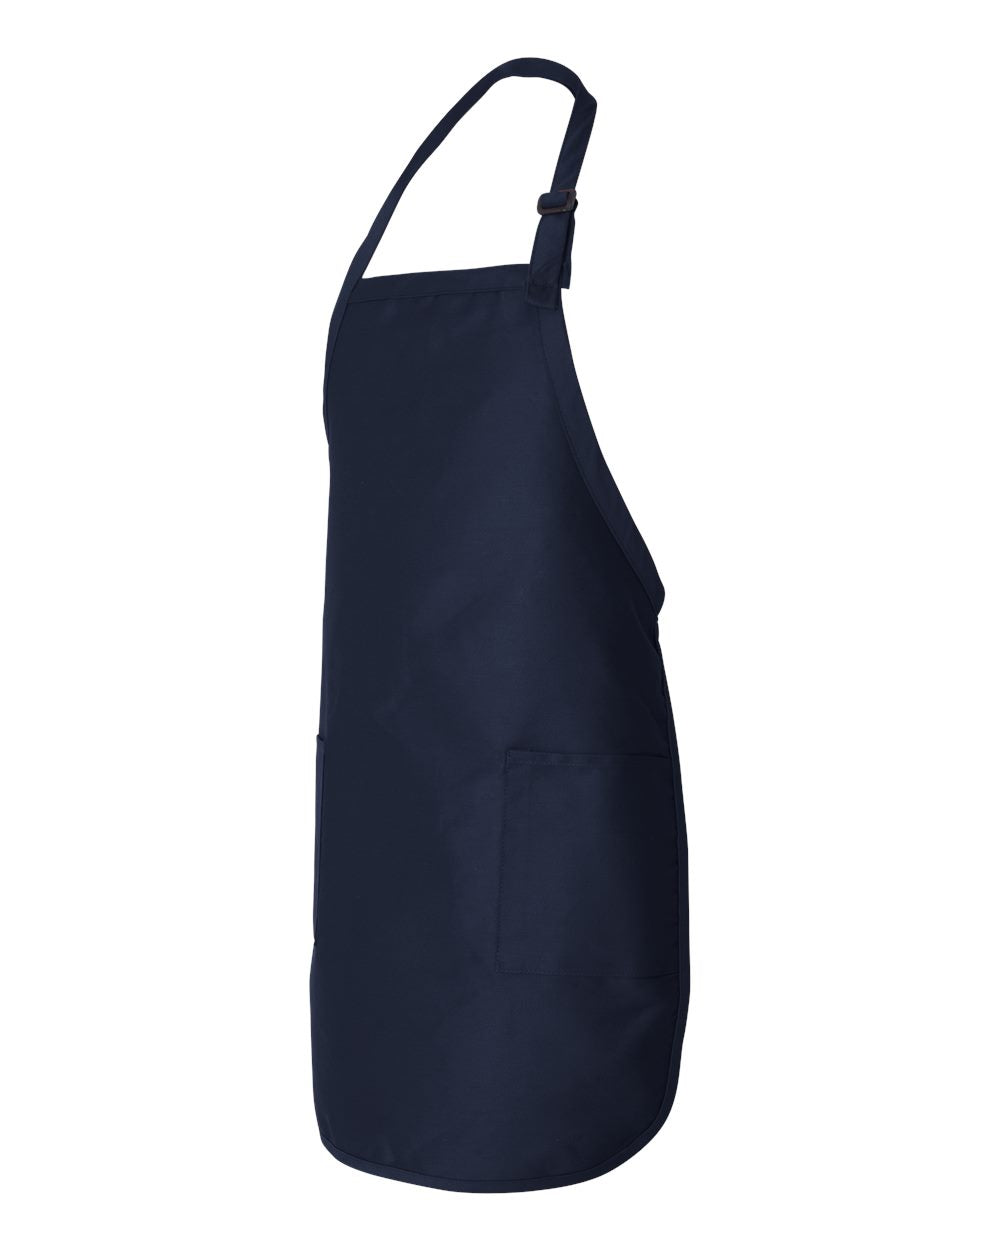 Q-Tees Full-Length Apron with Pockets Q4350 #color_Navy